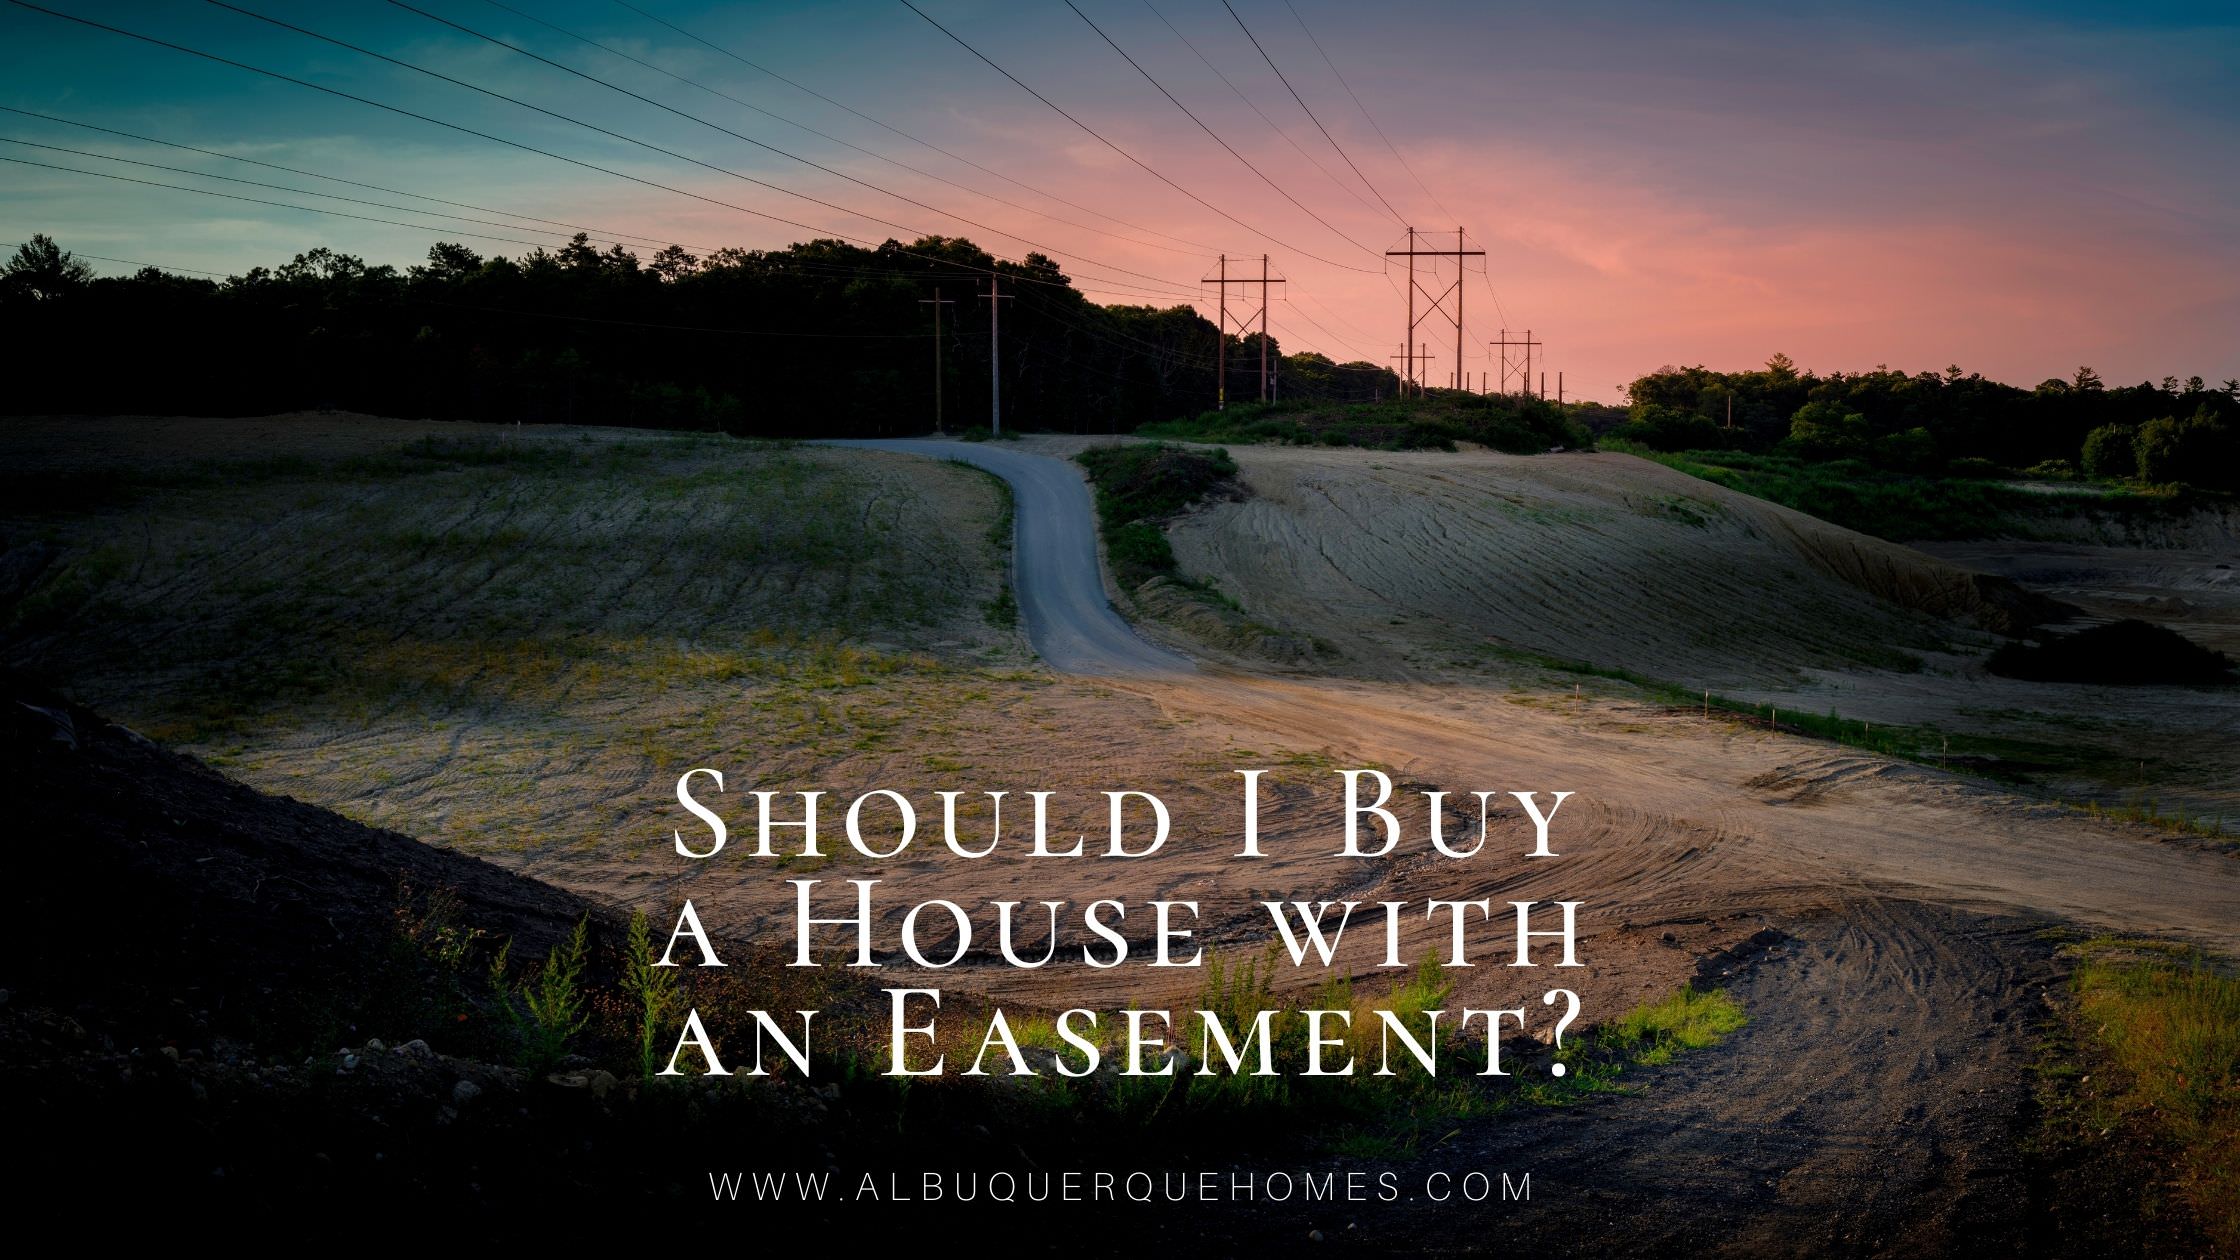 Should I Buy a House with an Easement?